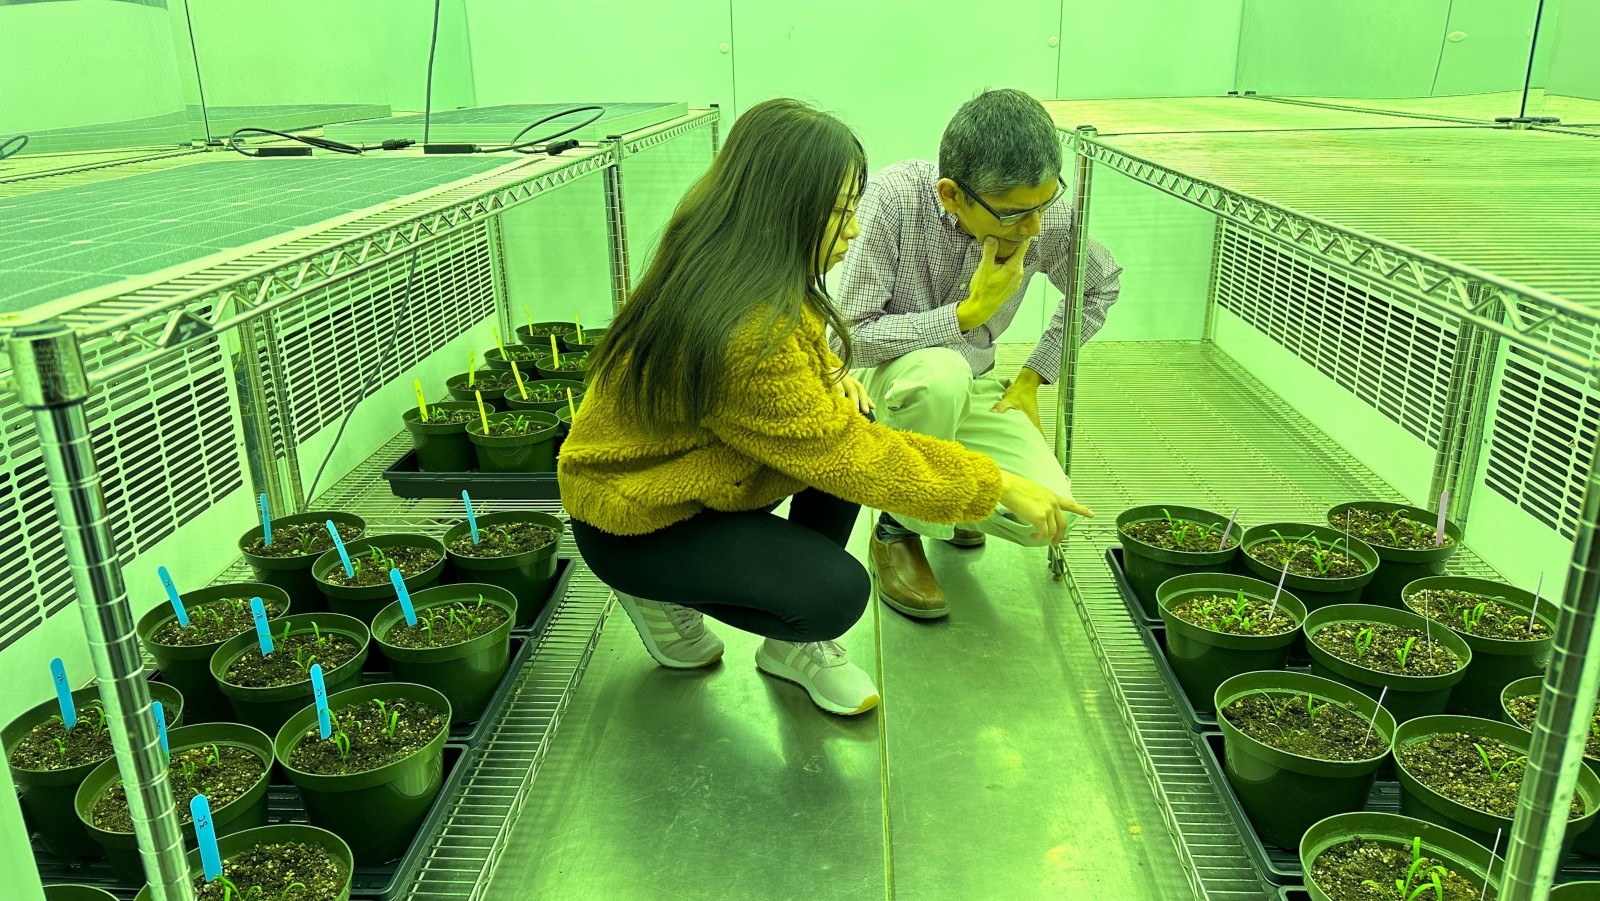 Researchers Guillermo Hernandez Ramirez (right) and Camila Quiroz examine spinach plants growing under different solar panels as part of their pilot project assessing the potential benefits of agrivoltaics. (Photo: Supplied)